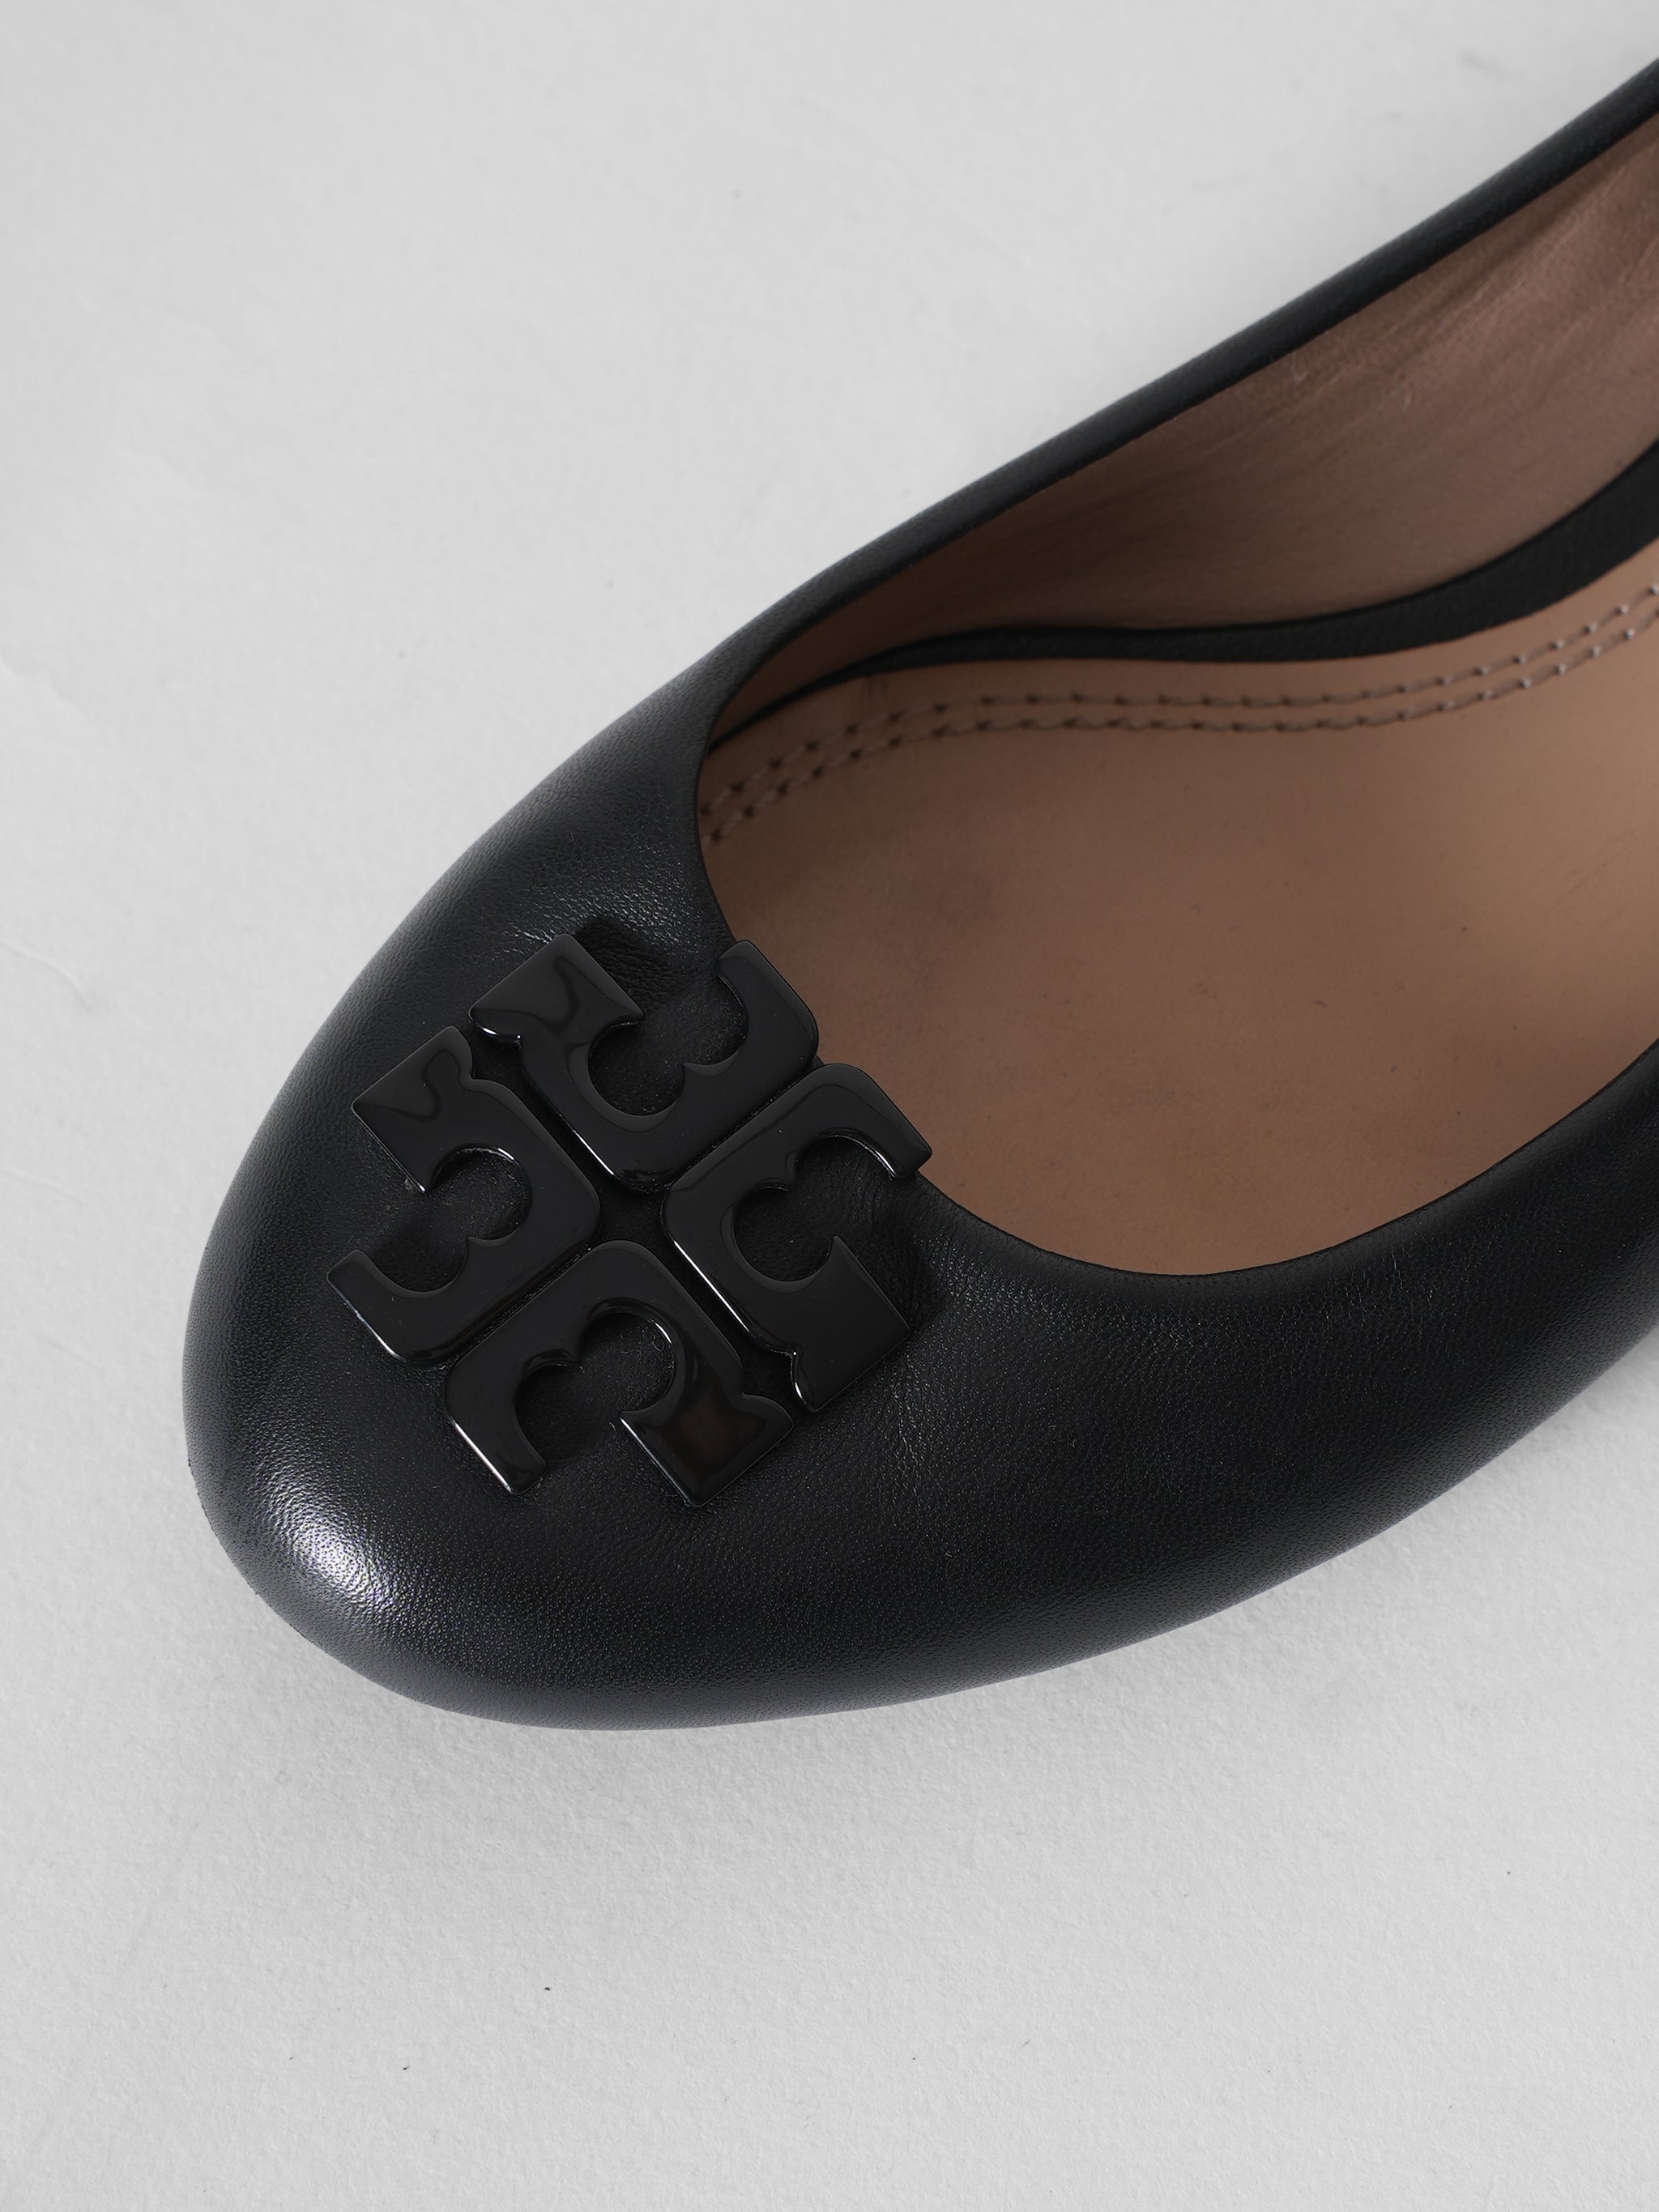 New Tory Burch Leather Ballet